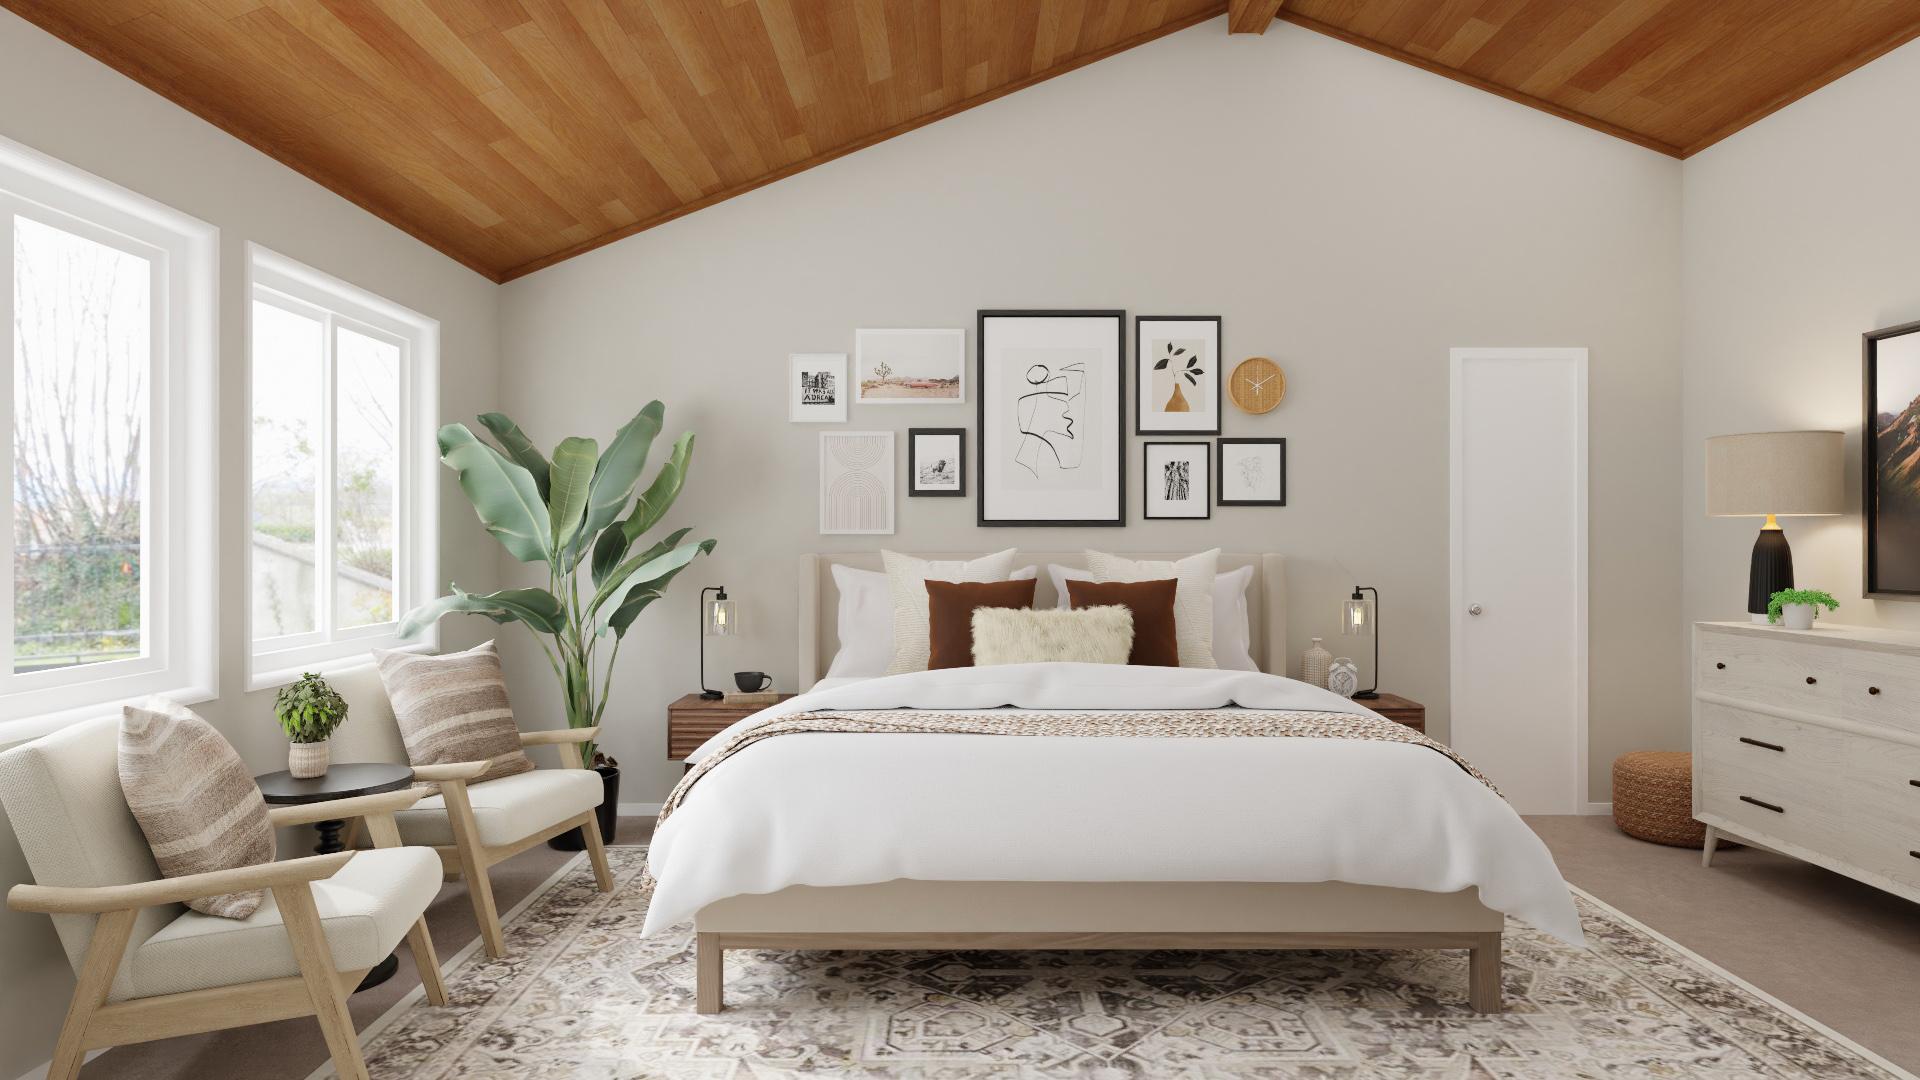 Sloped Wooden Ceiling: A Mid-Century Rustic Bedroom